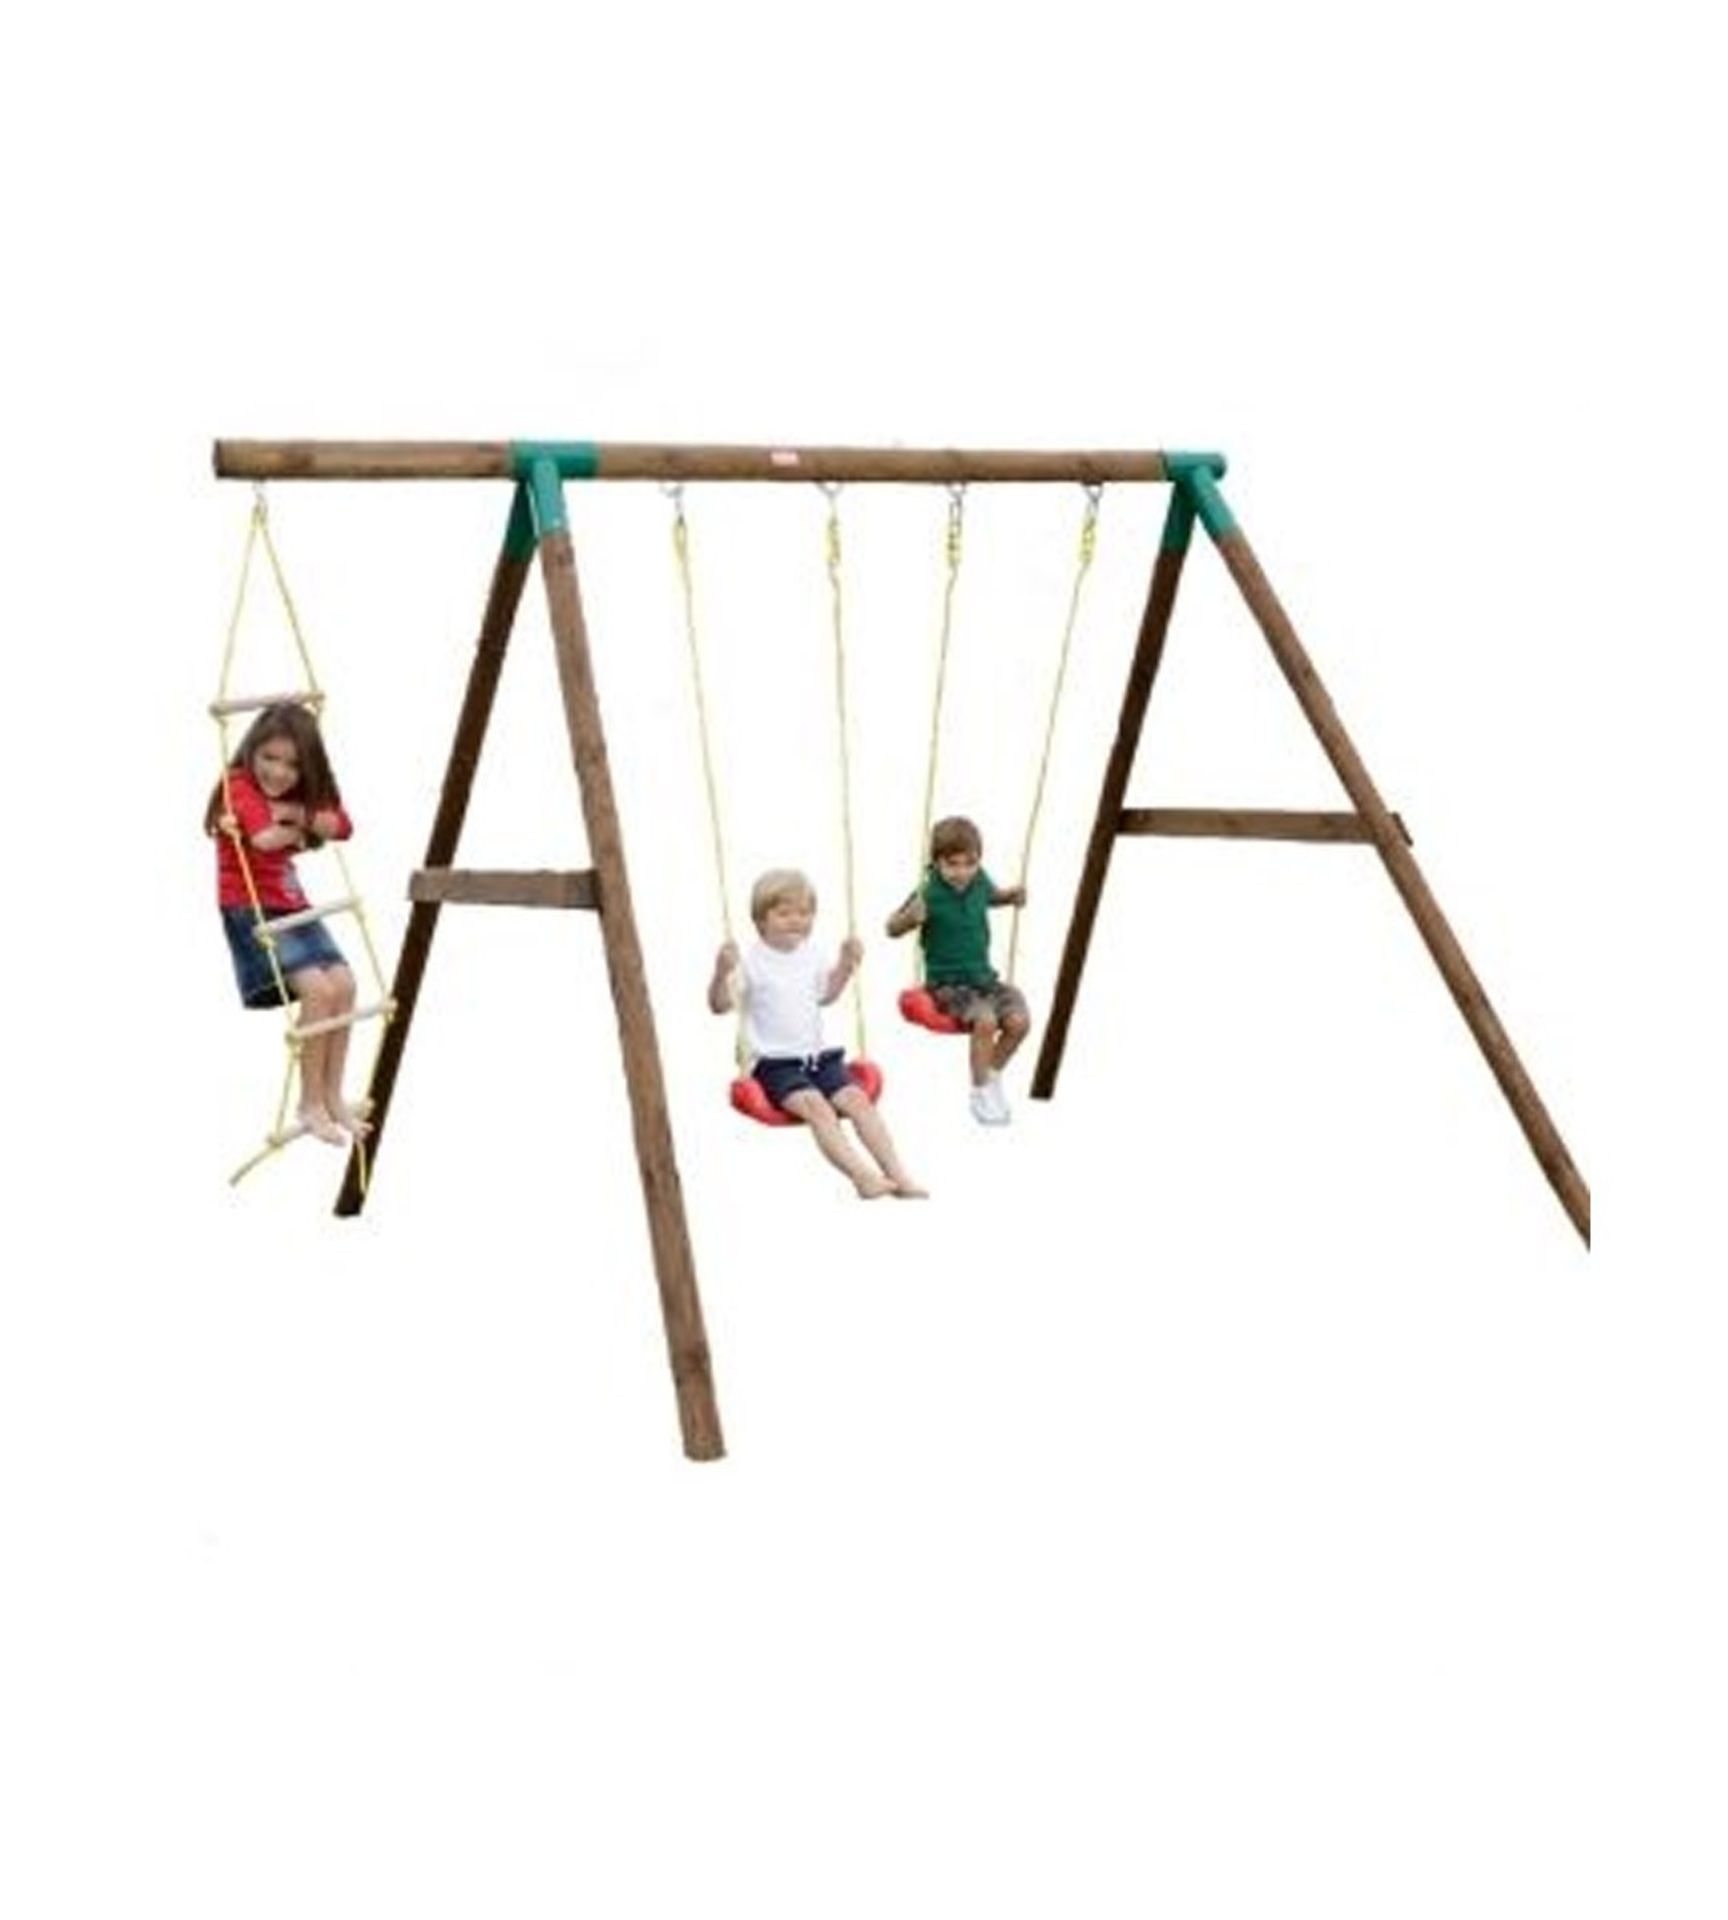 1 x Riga Swing Set with Ladder. RRP £319.99. This wooden play system will provide hours of outdoor - Image 2 of 2